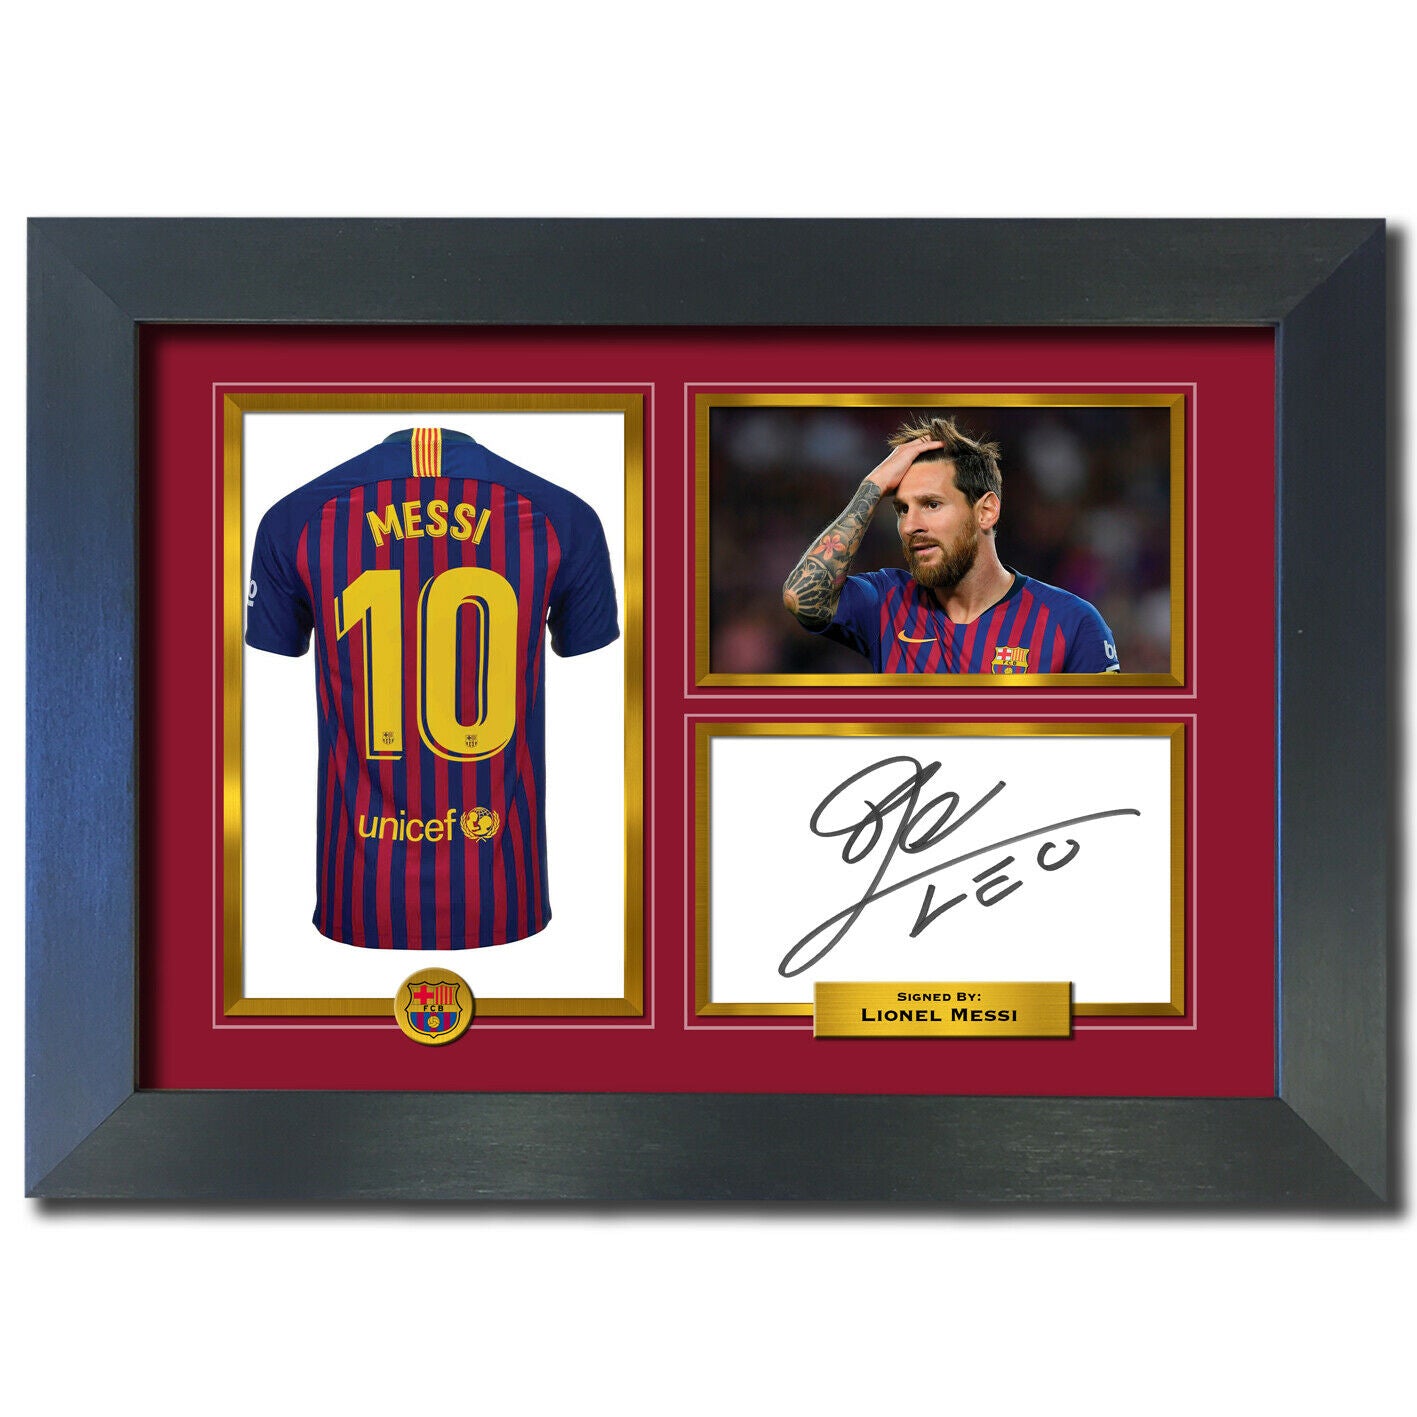 LIONEL MESSI Autograph Signed Photo Birthday Christmas Gift Re-Print A4 790